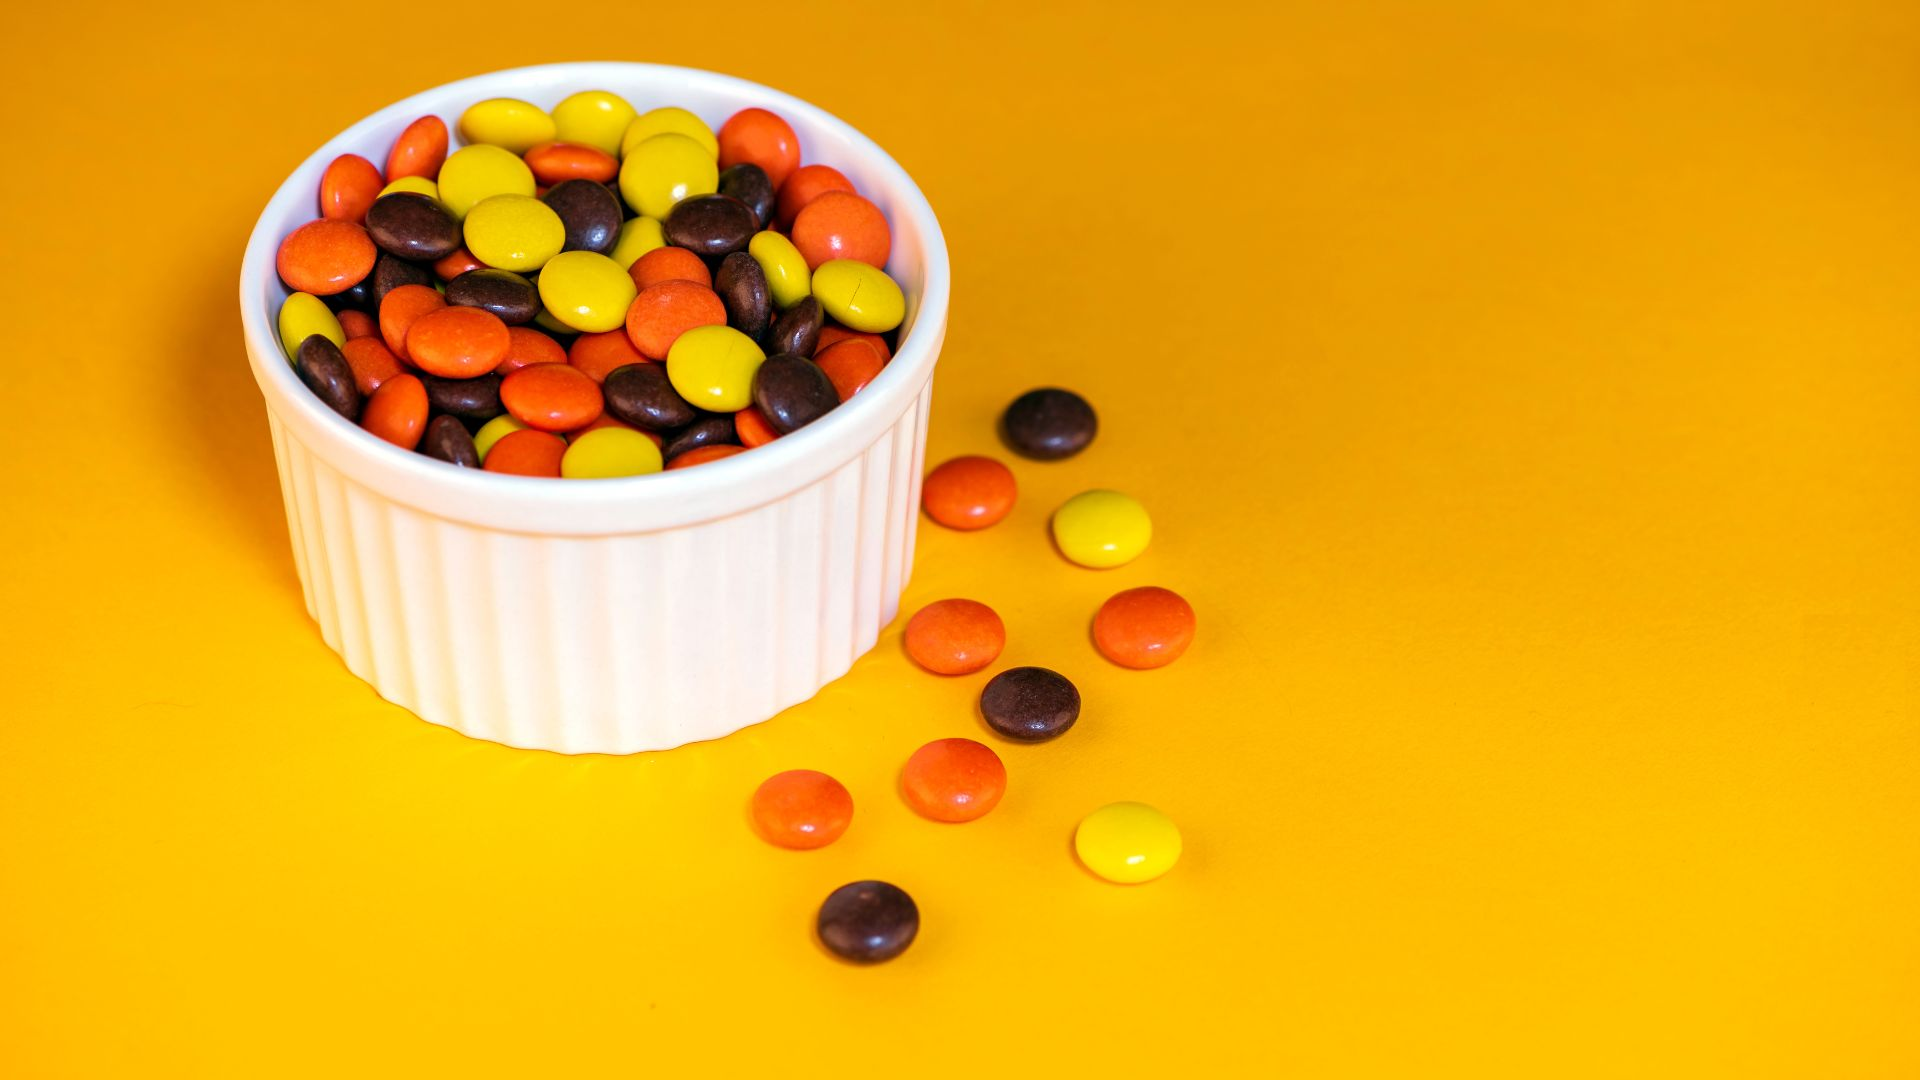 dogs eat reese's pieces, dogs eat reese's pieces, dogs eat reese's pieces, dog ate, dog ate, dog eat reese's puffs, dog reese's pieces, corn syrup, body weight, how much chocolate, fat content, dog reese's pieces